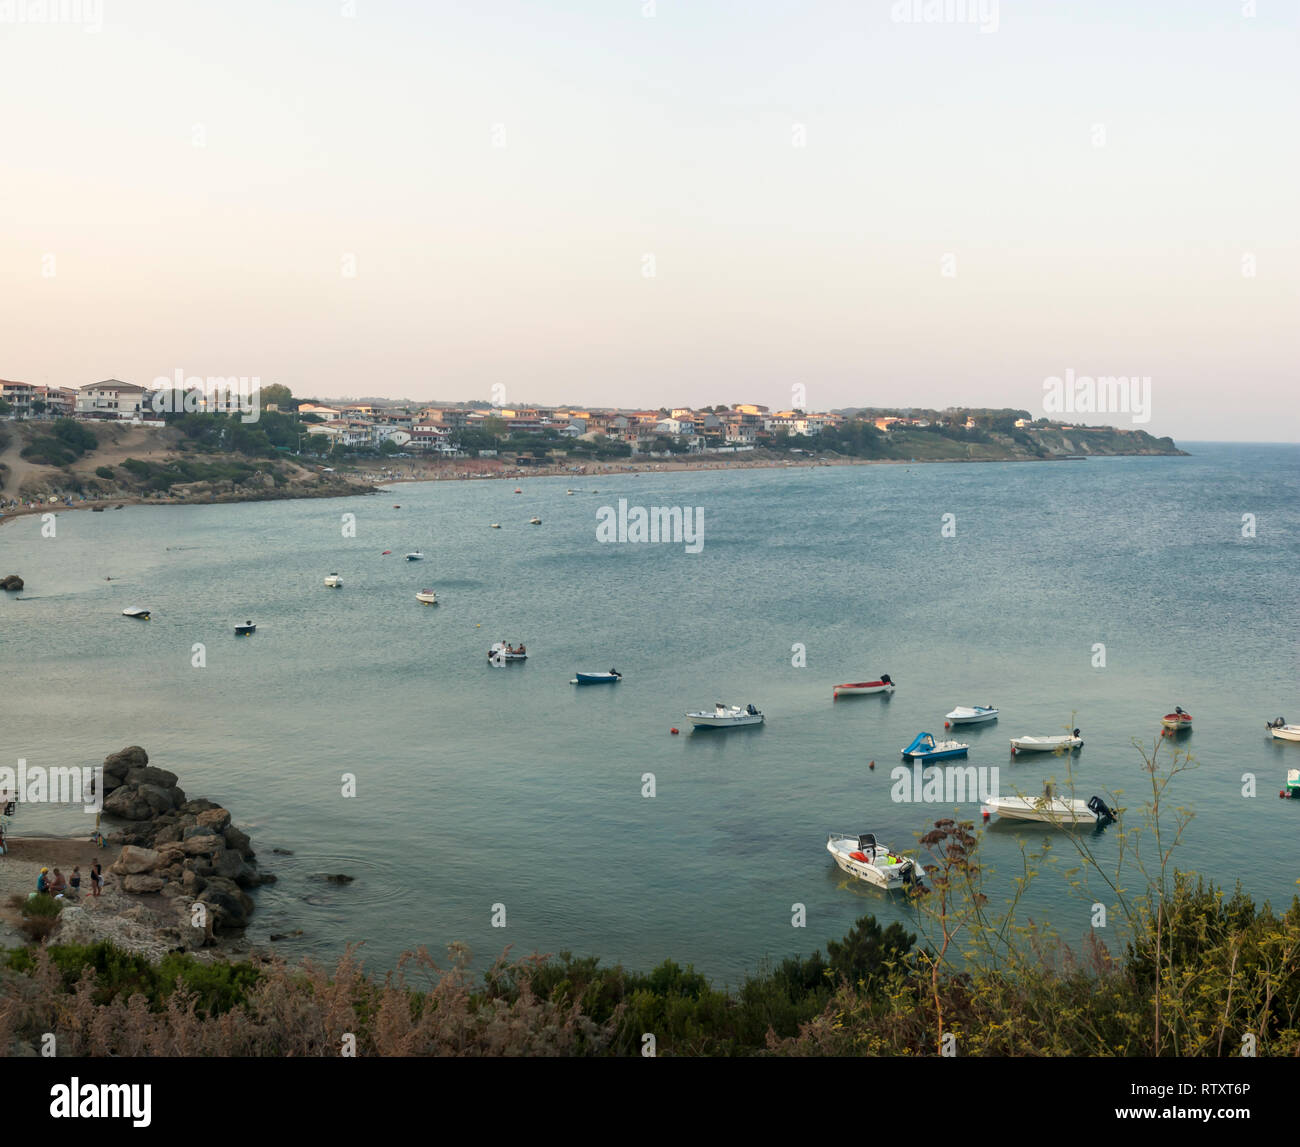 panoramic view of Capo Rizzuto bay, a seaside resort on the Calabrian coast of the Ionic Sea Stock Photo